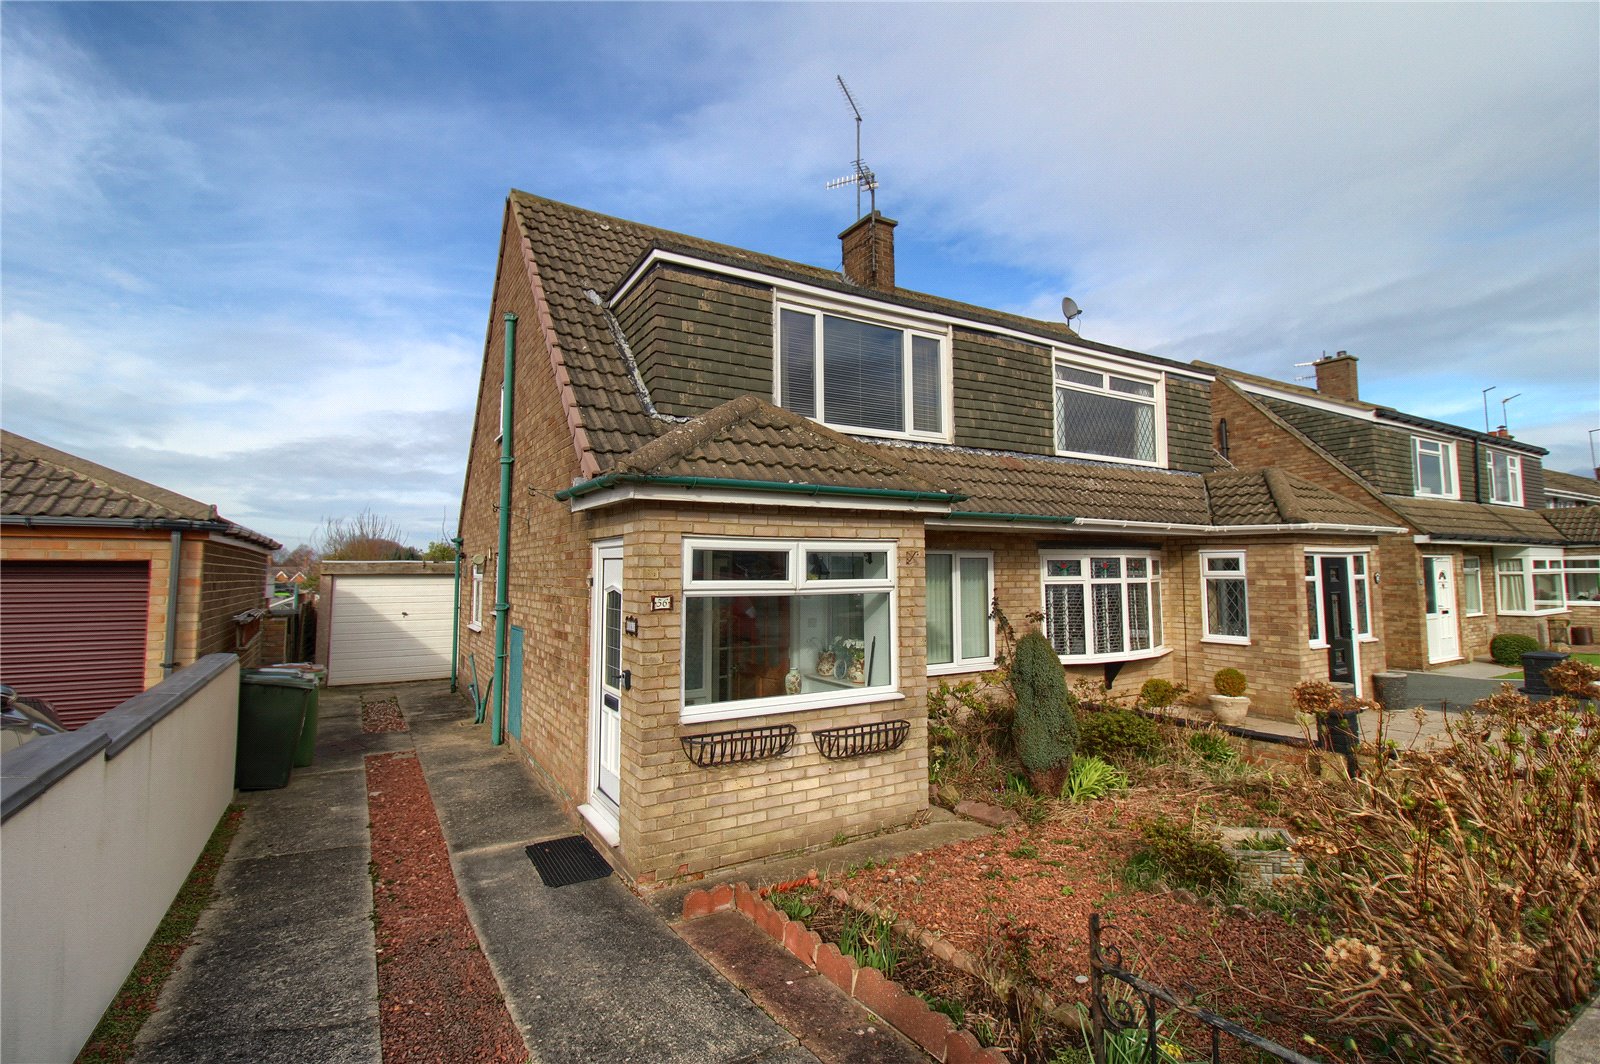 3 bed house for sale in Whitby Avenue, Guisborough 1